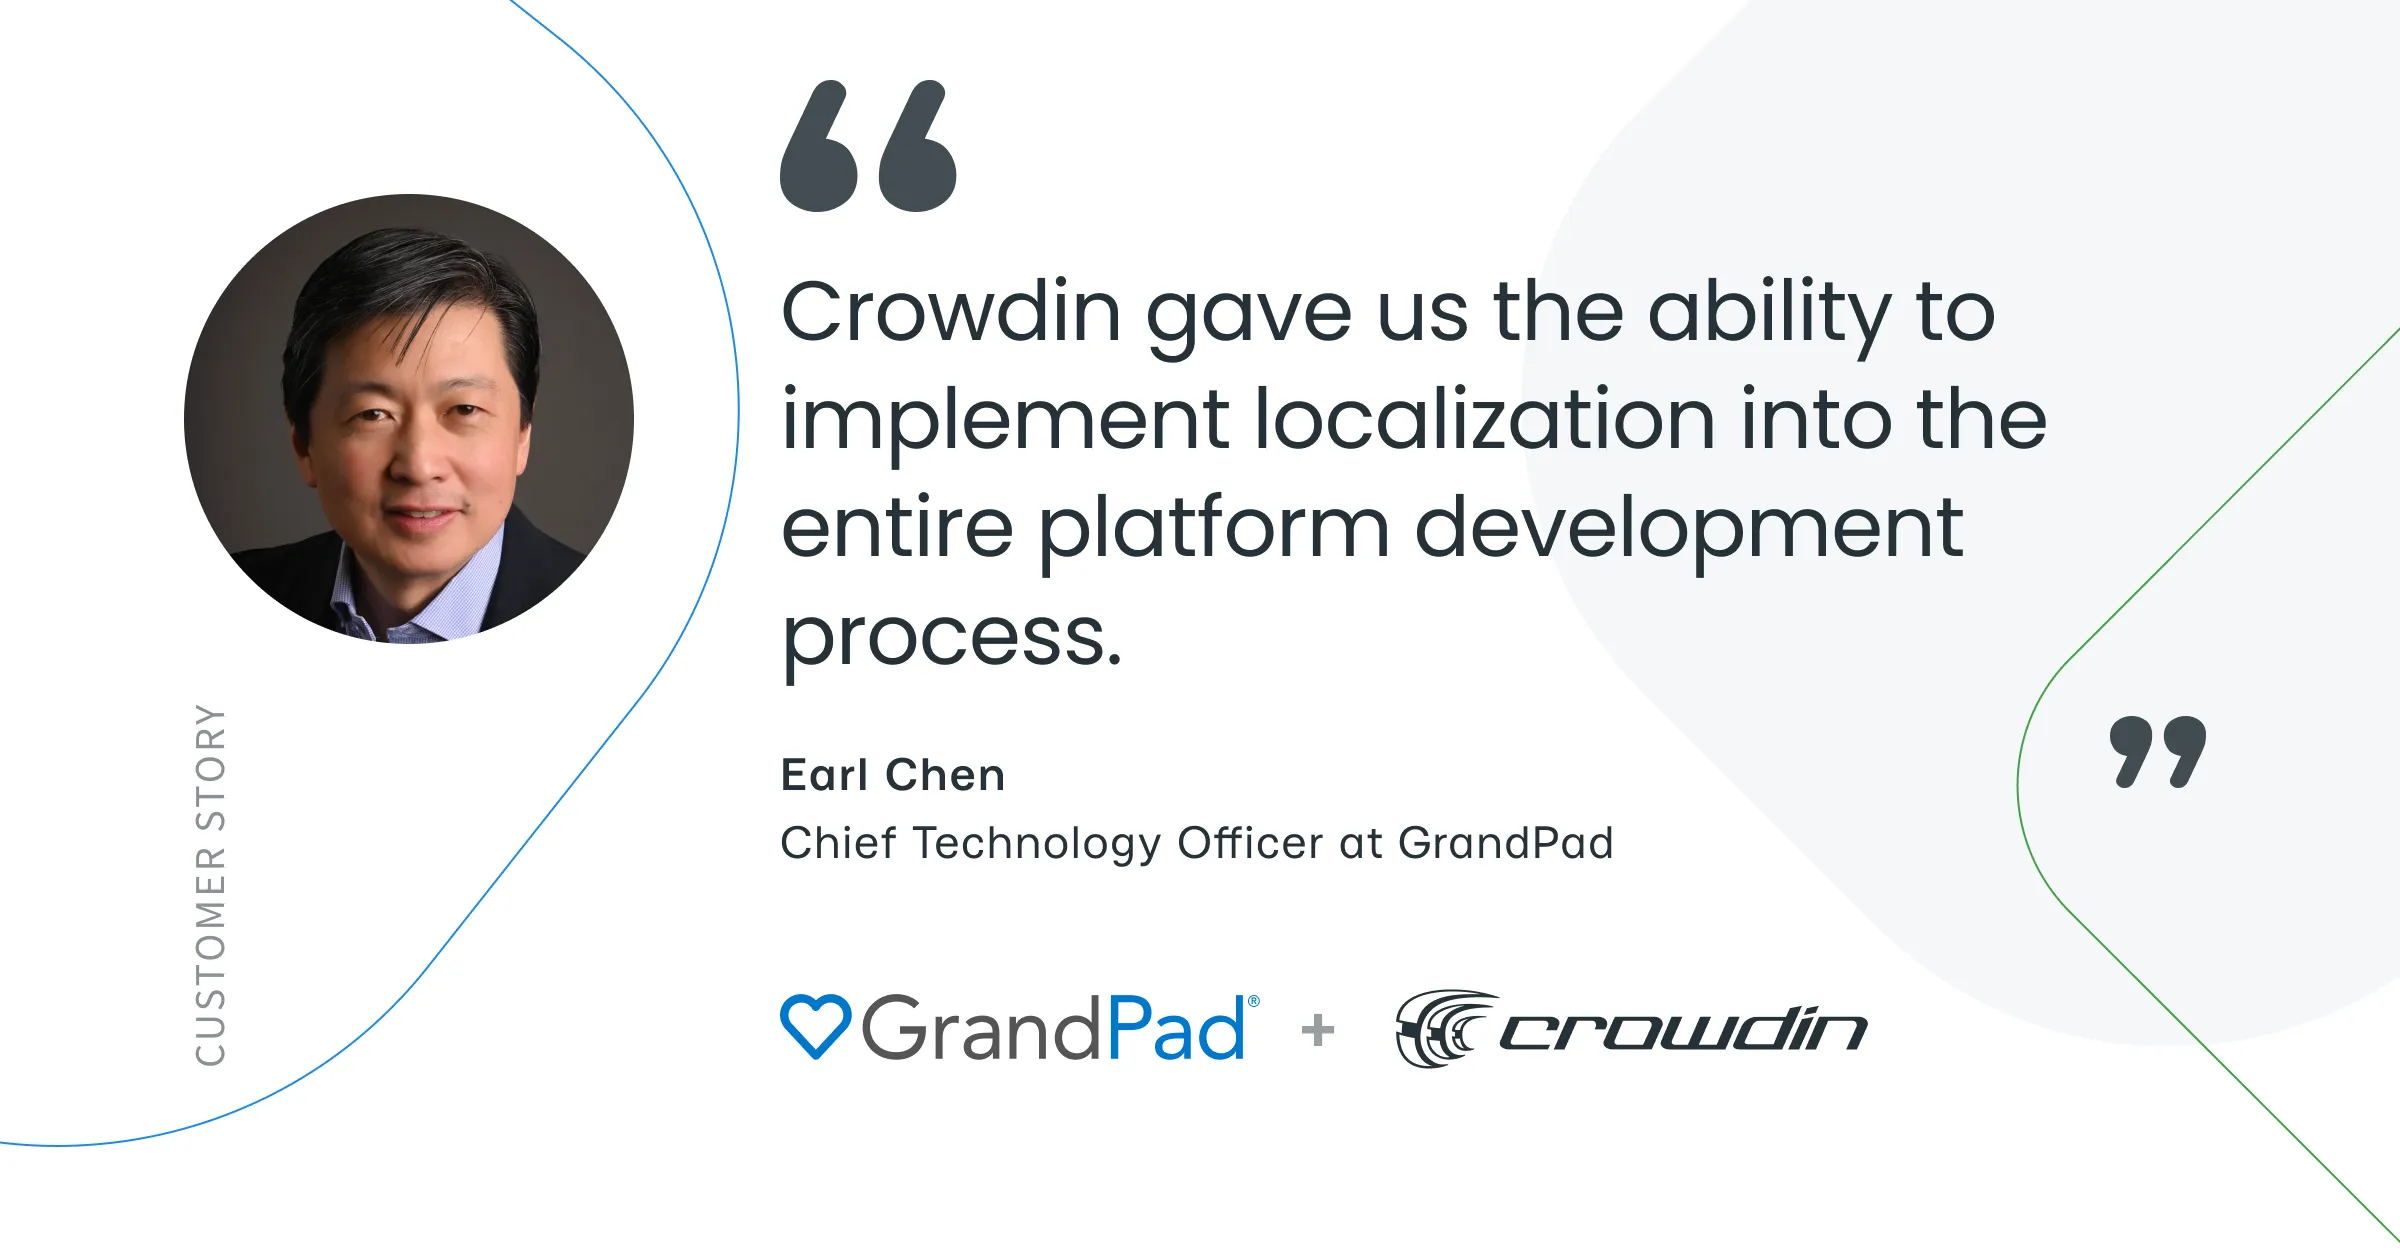 How GrandPad Powers Localization with Crowdin